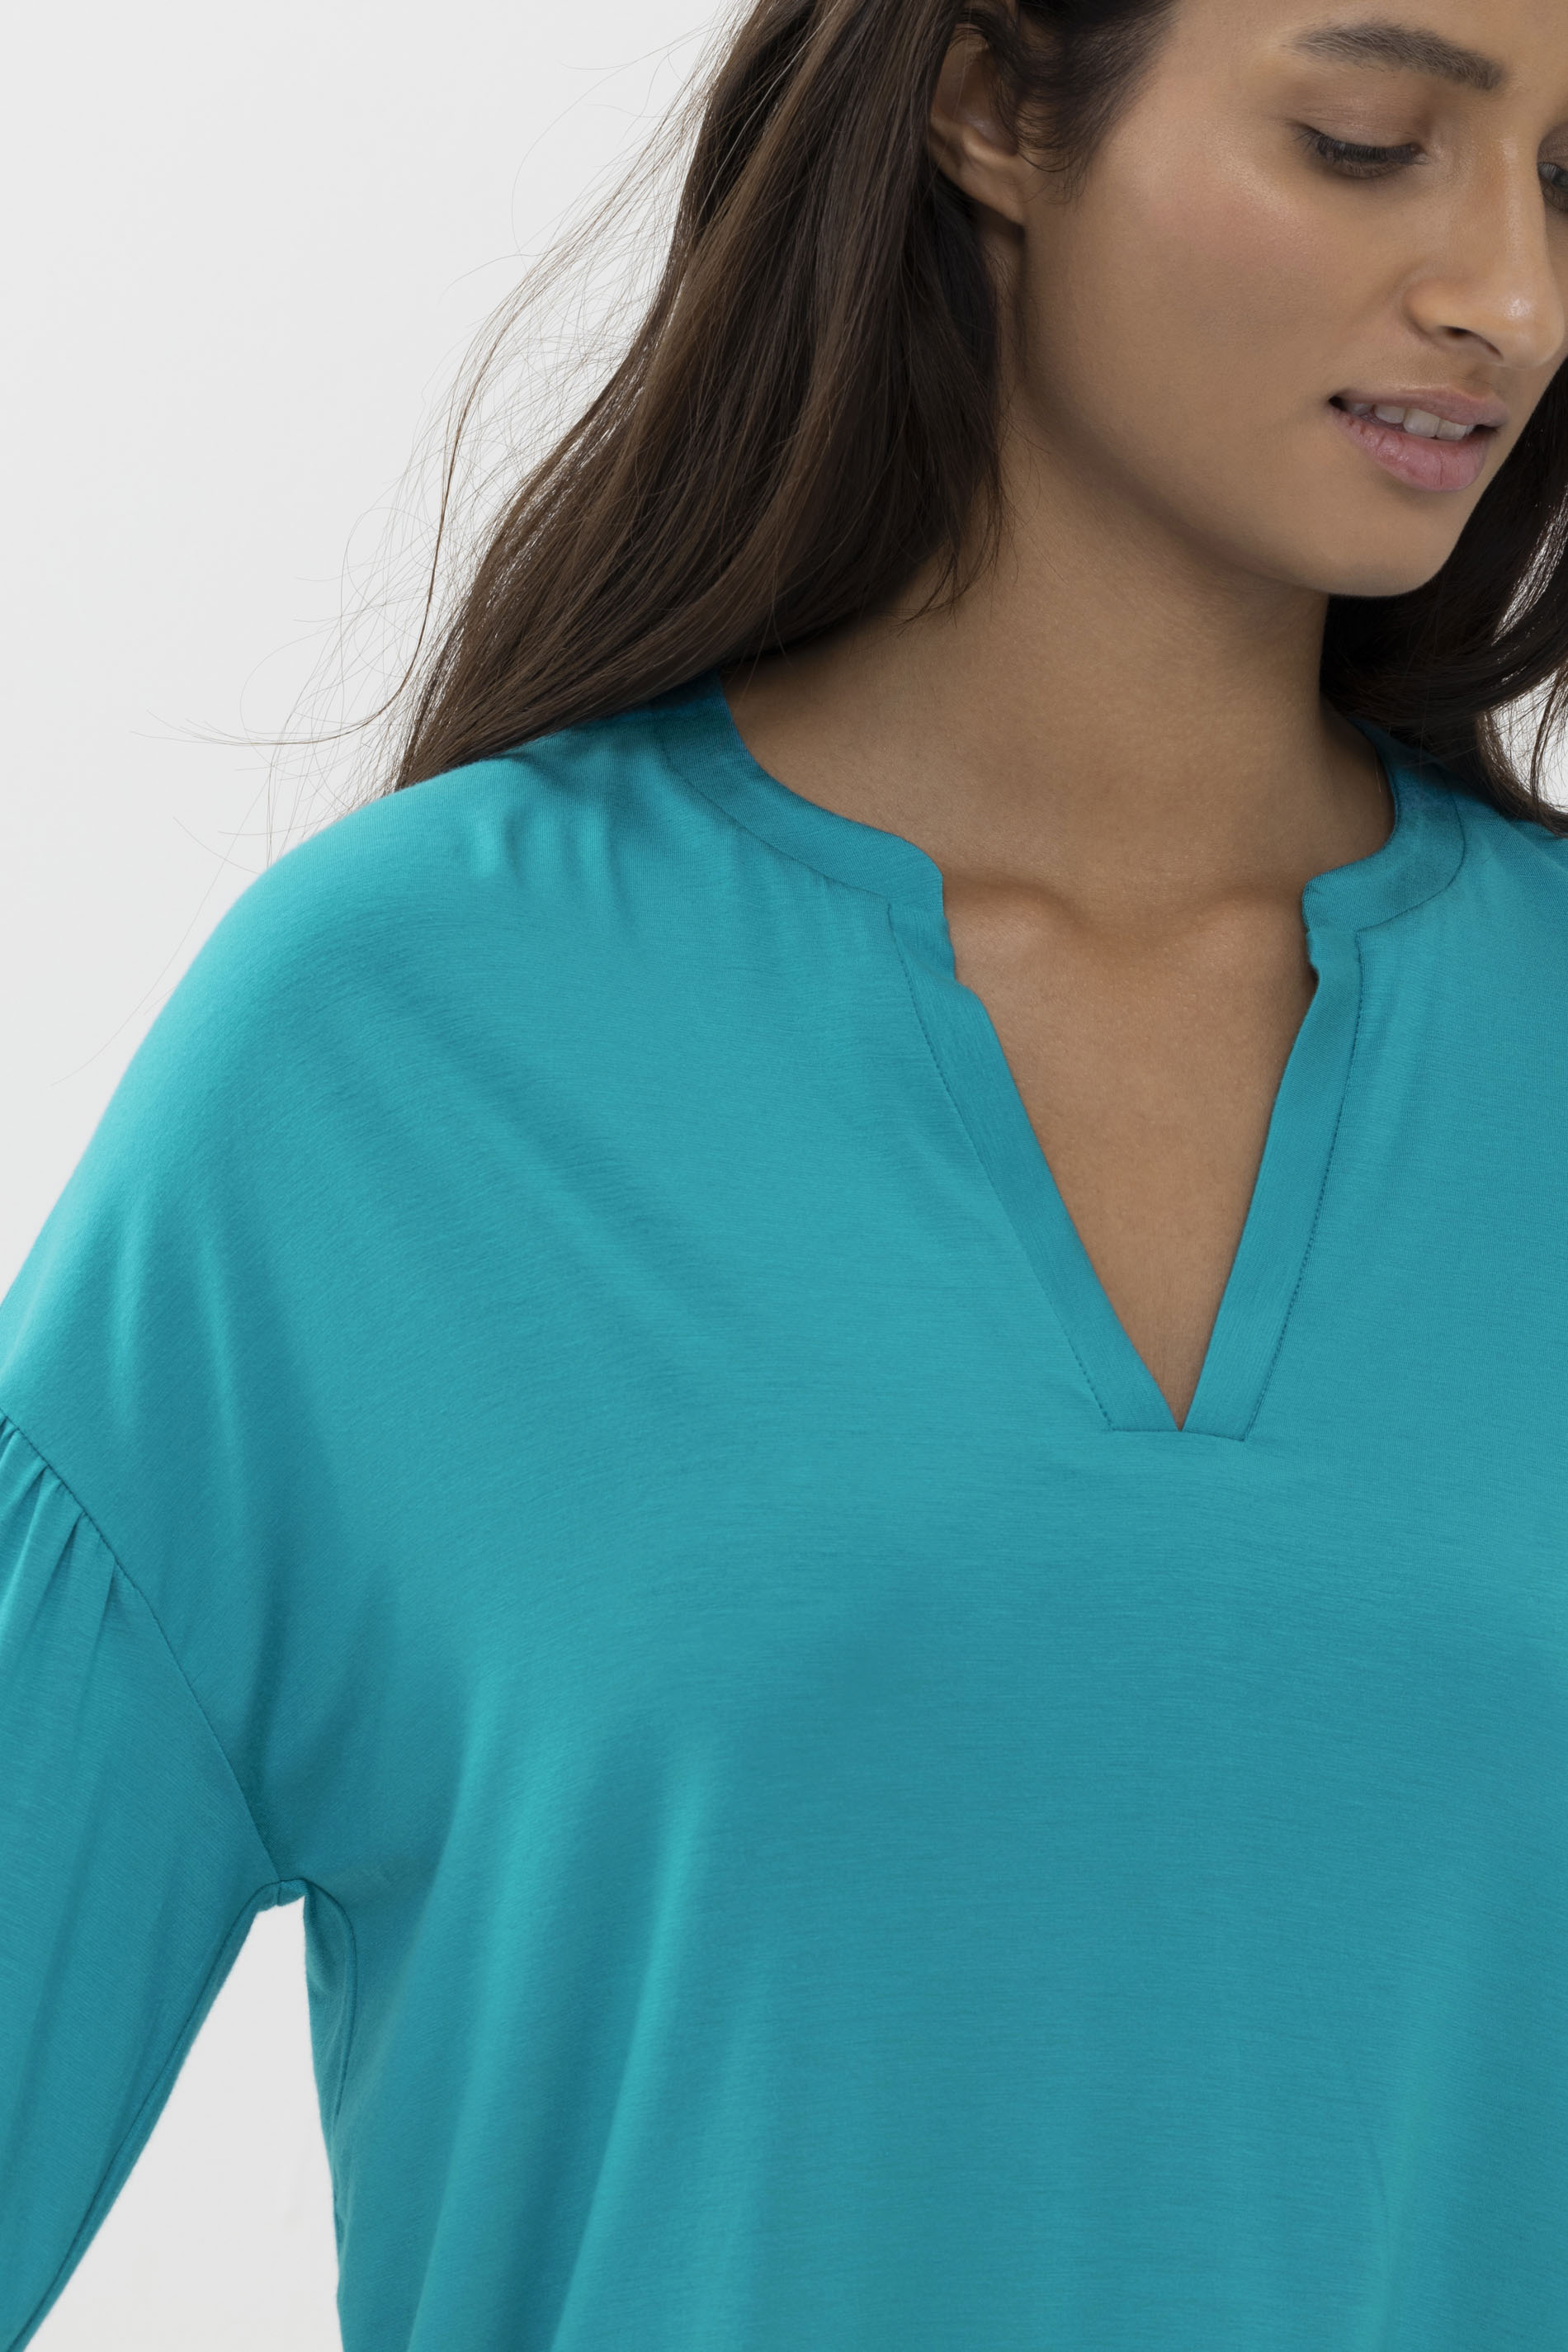 Long-sleeved shirt Serie Alena Detail View 01 | mey®